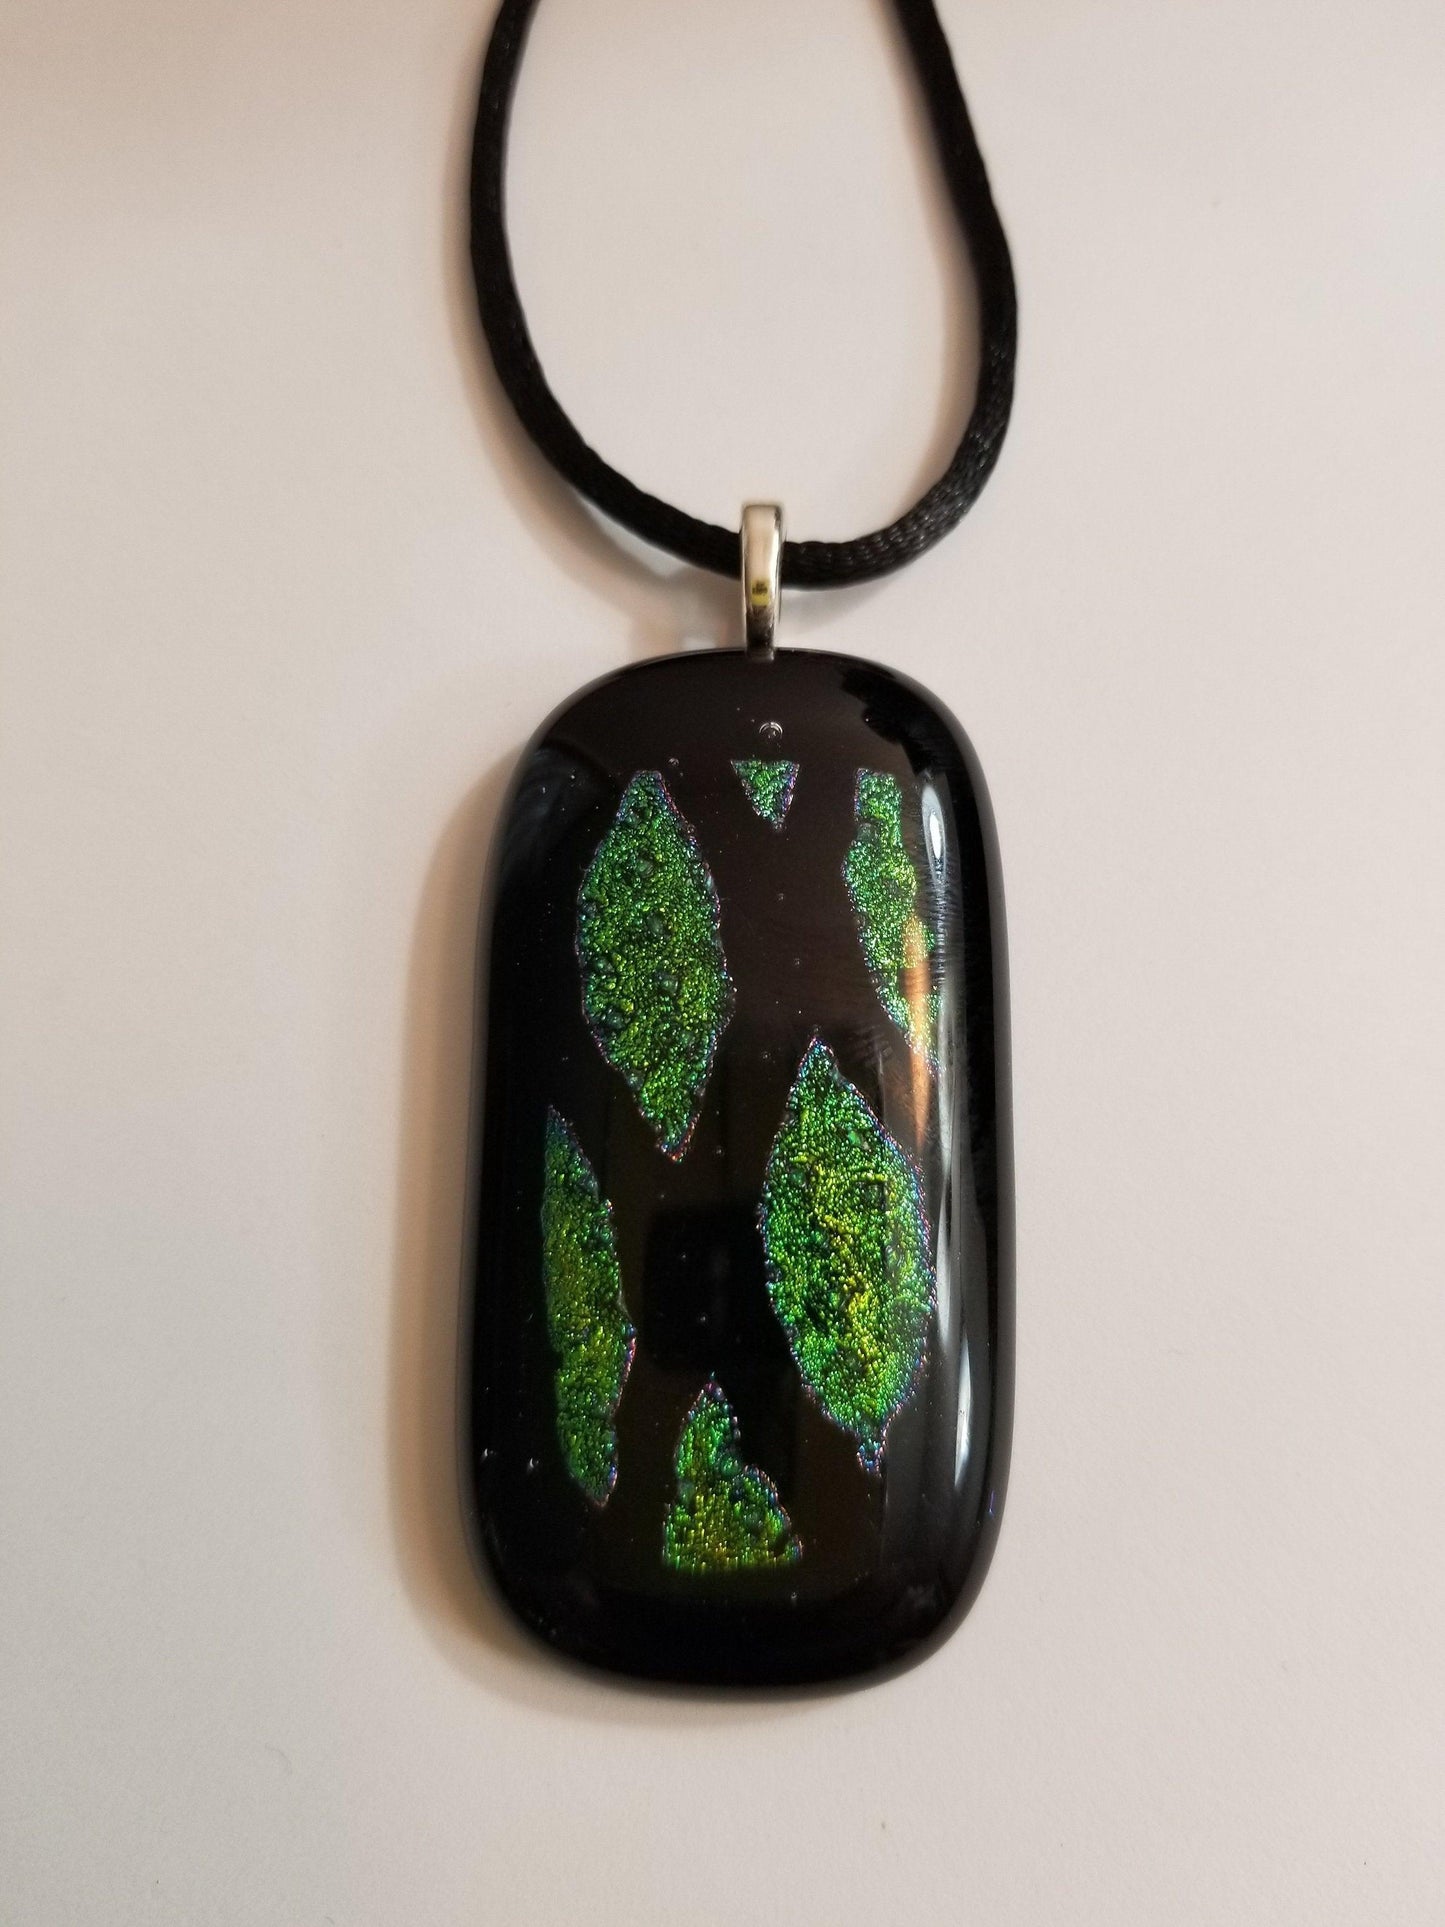 Green and Black Animal print fused glass pendant necklace with 18 inch black cord